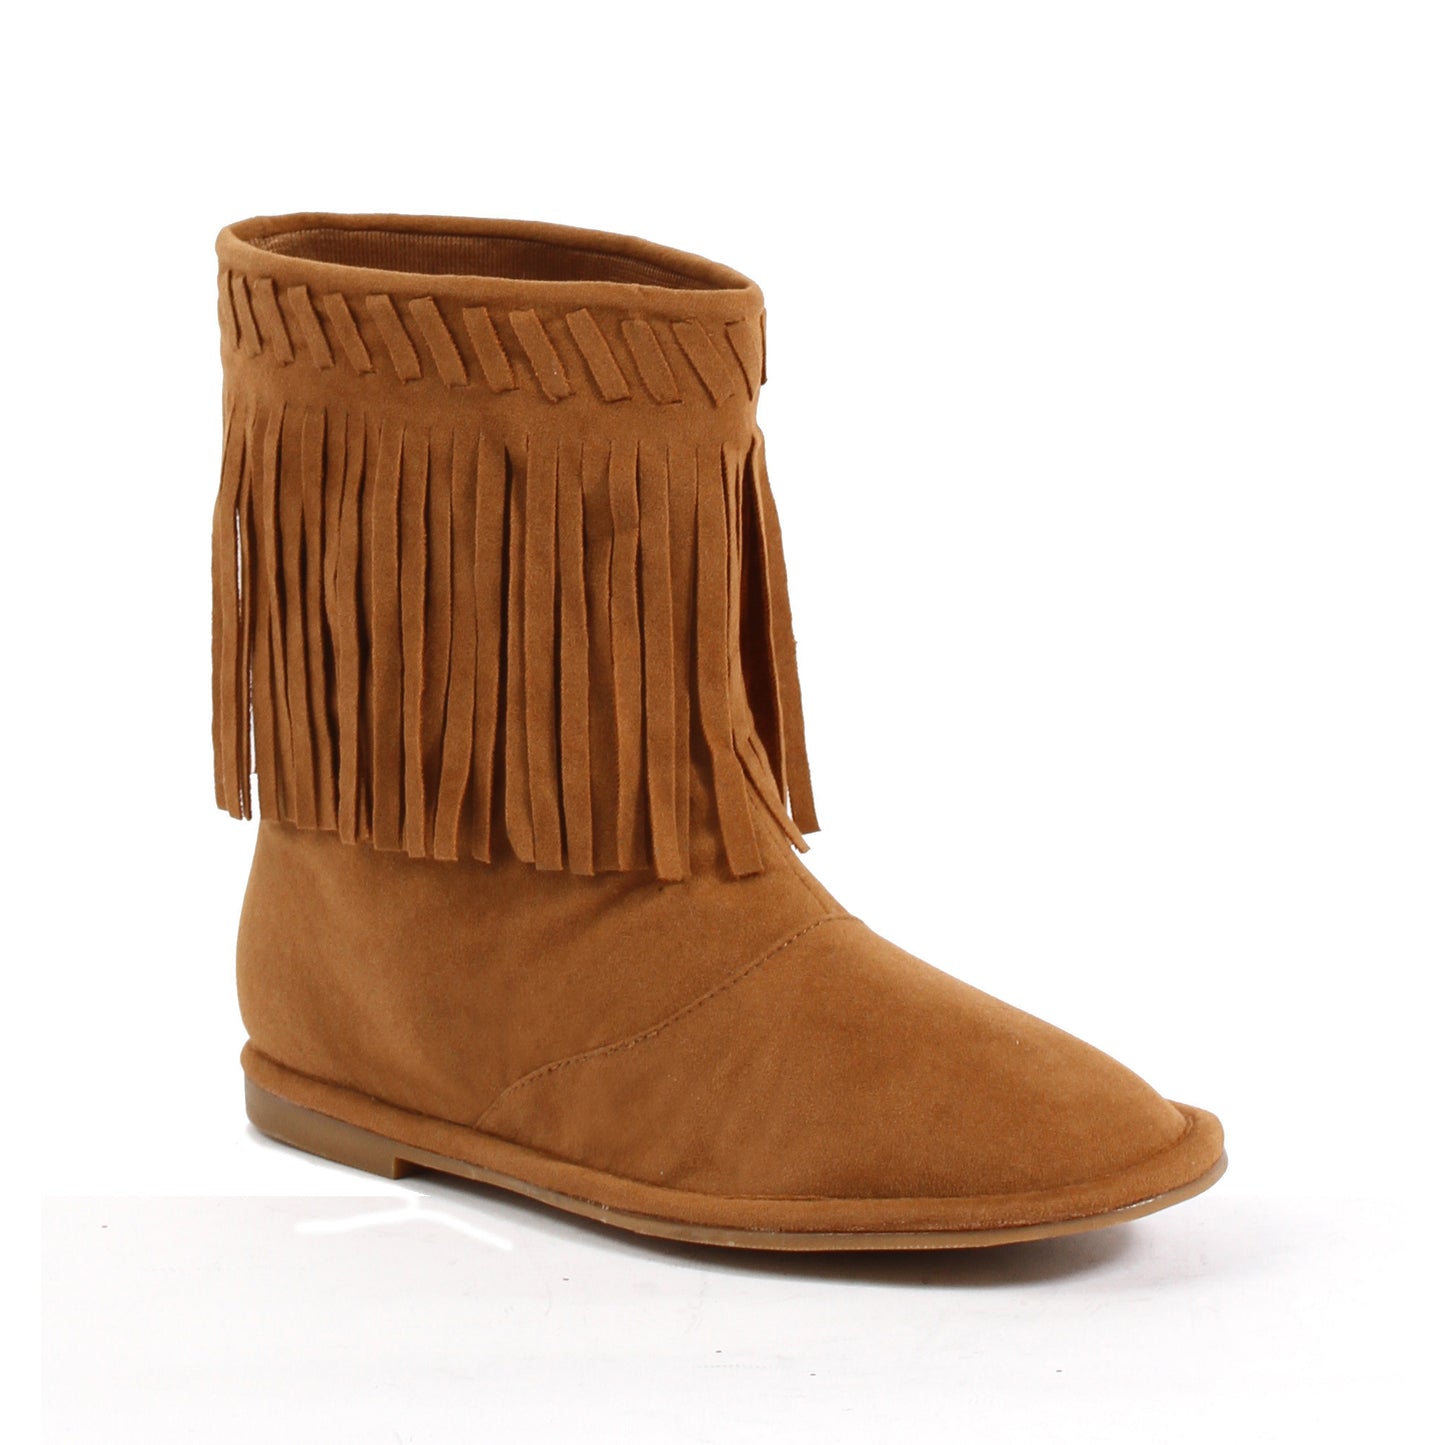 Flat Children's Moccasin Boot with Fringe.